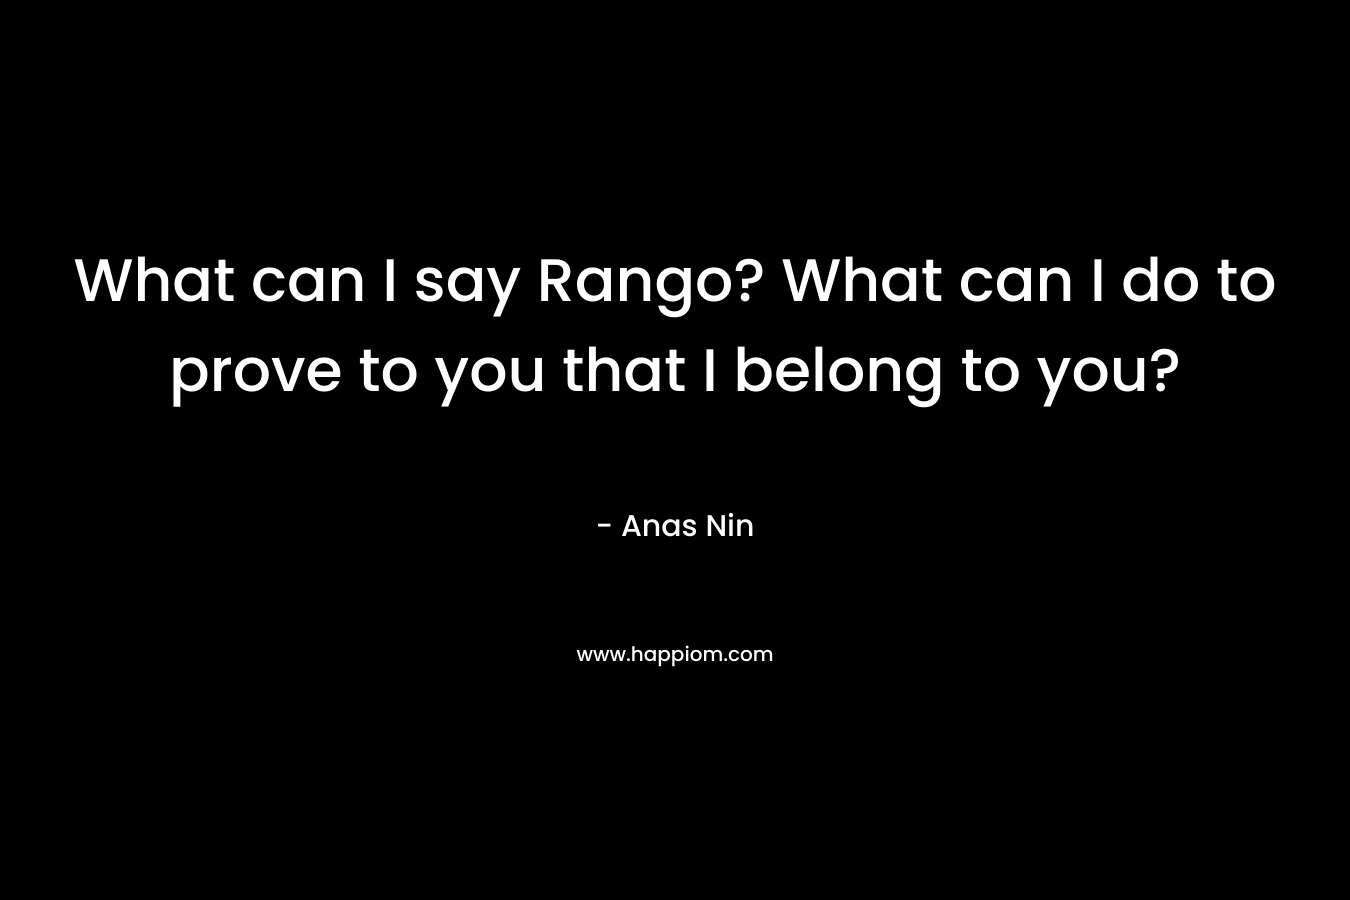 What can I say Rango? What can I do to prove to you that I belong to you?